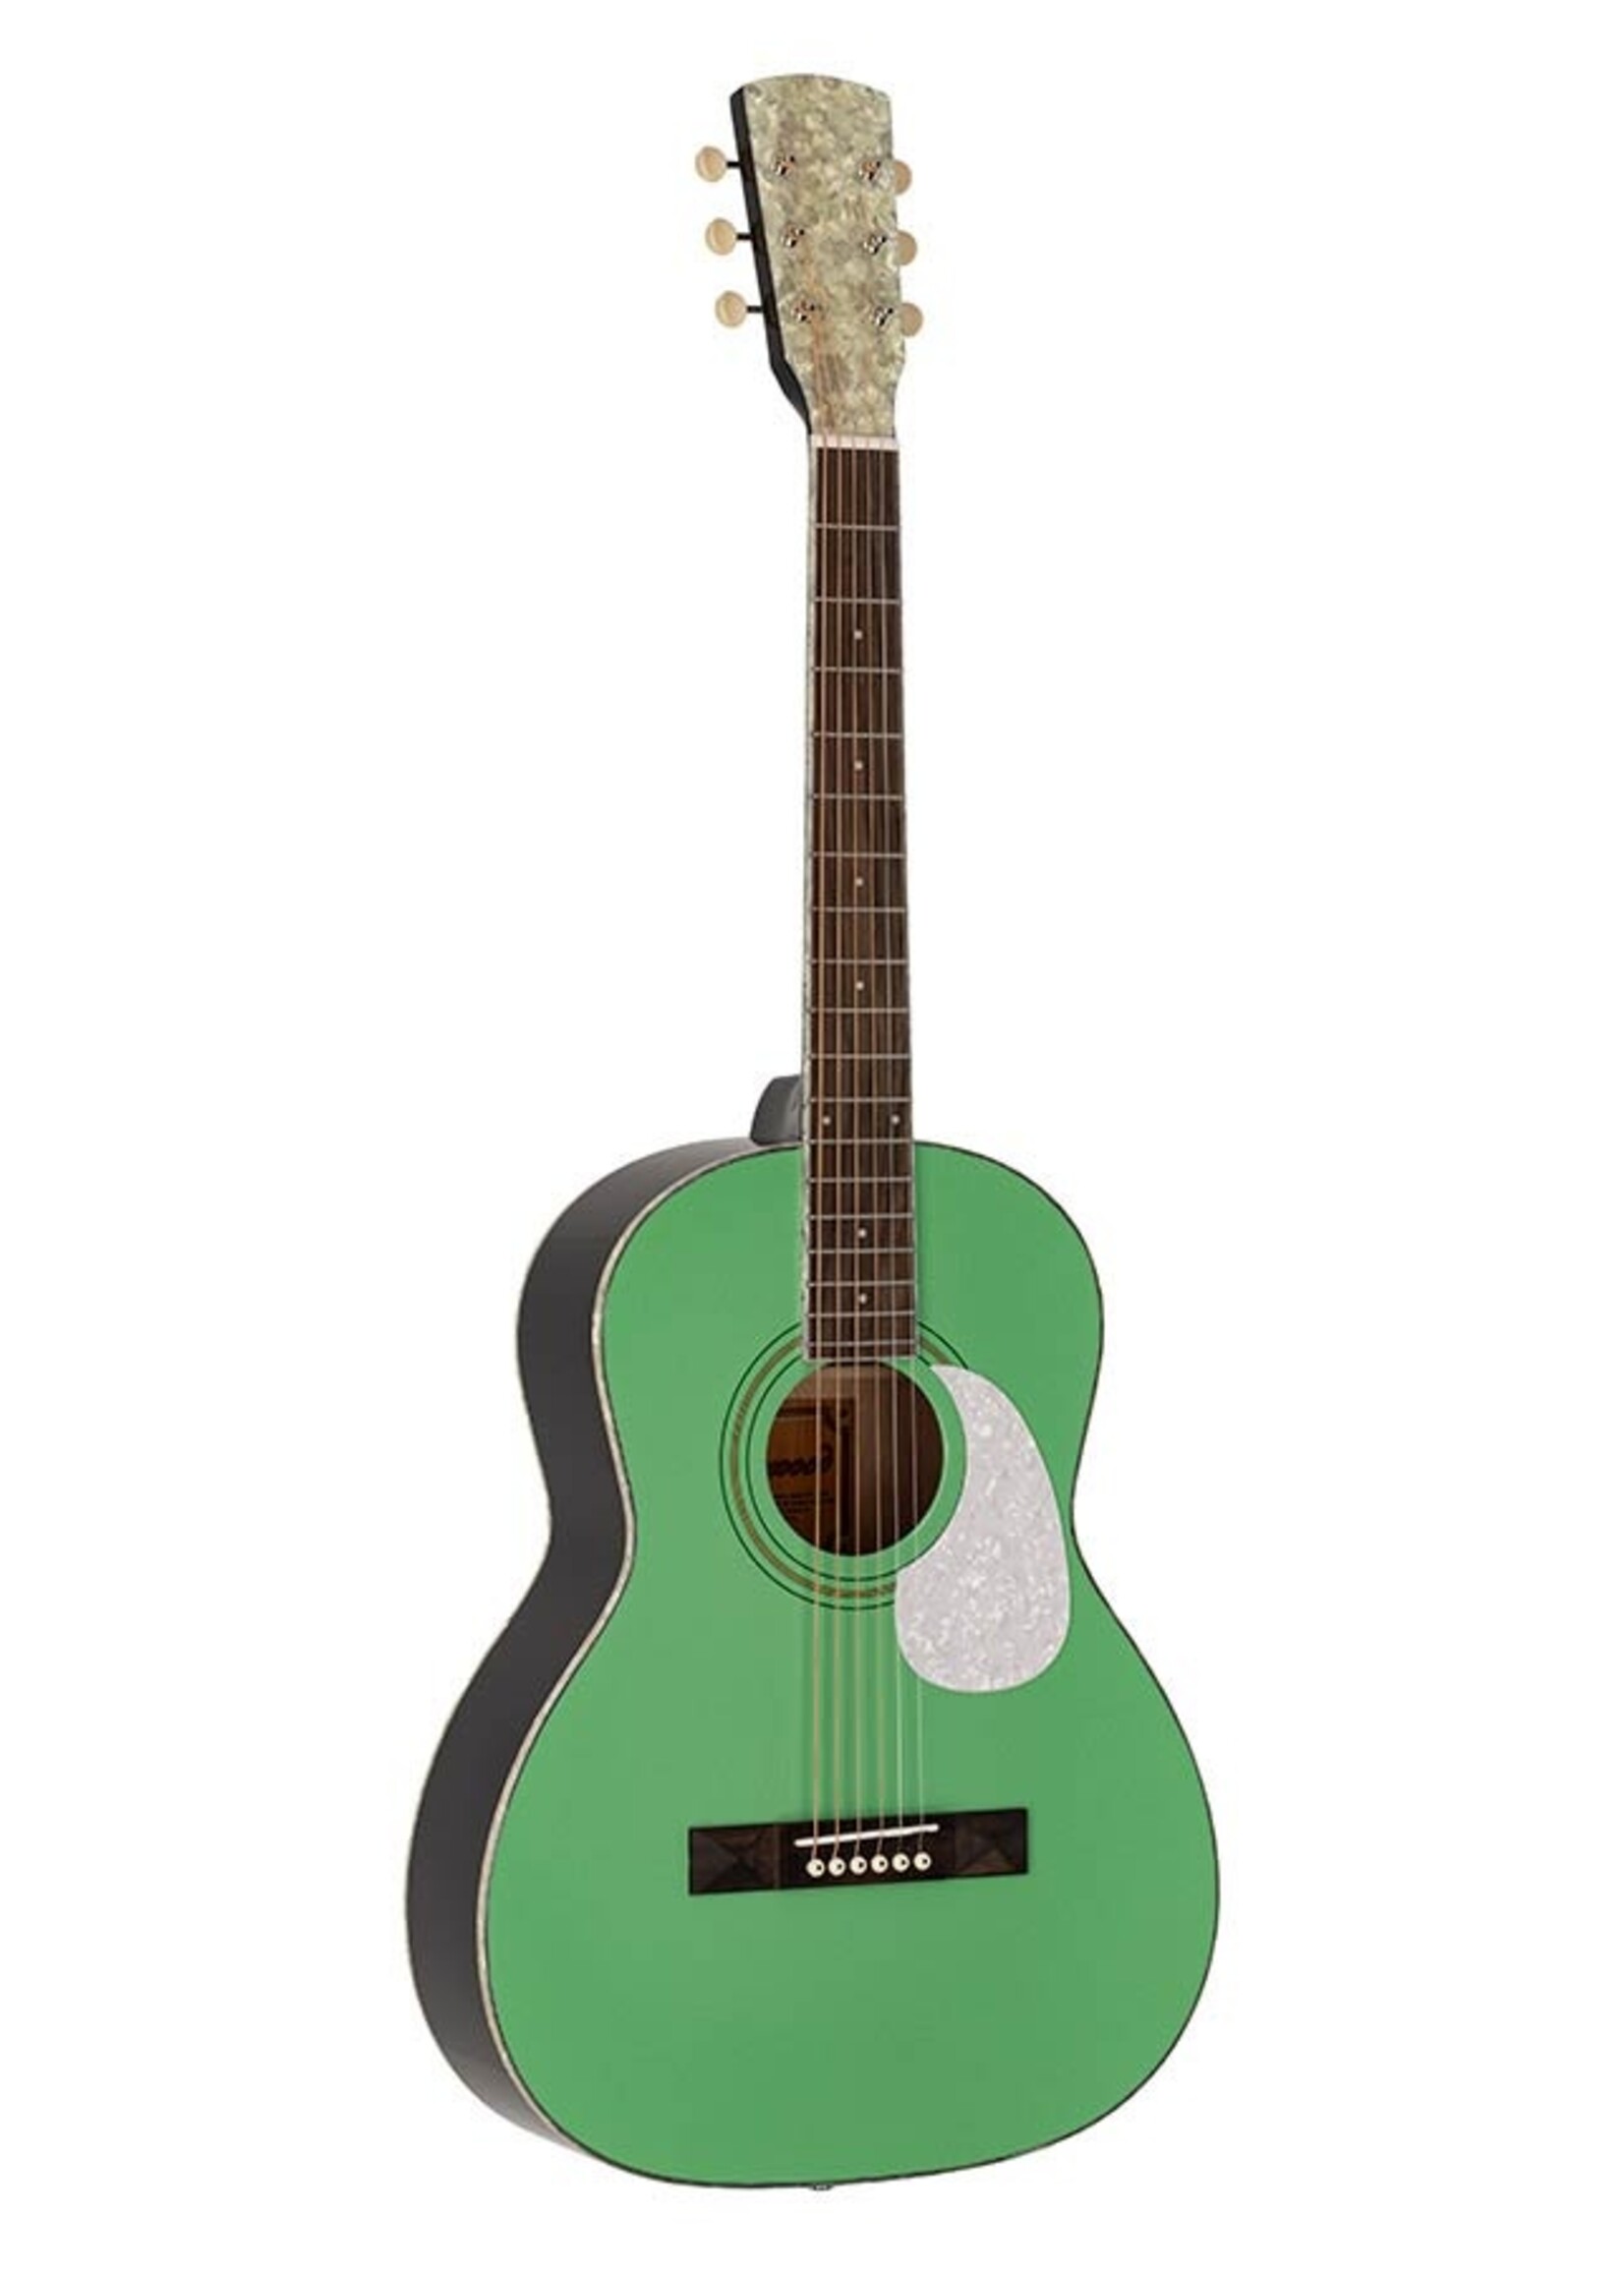 Richwood Richwood HSP-55-GN Heritage Series parlor guitar with solid spruce top, mint Green